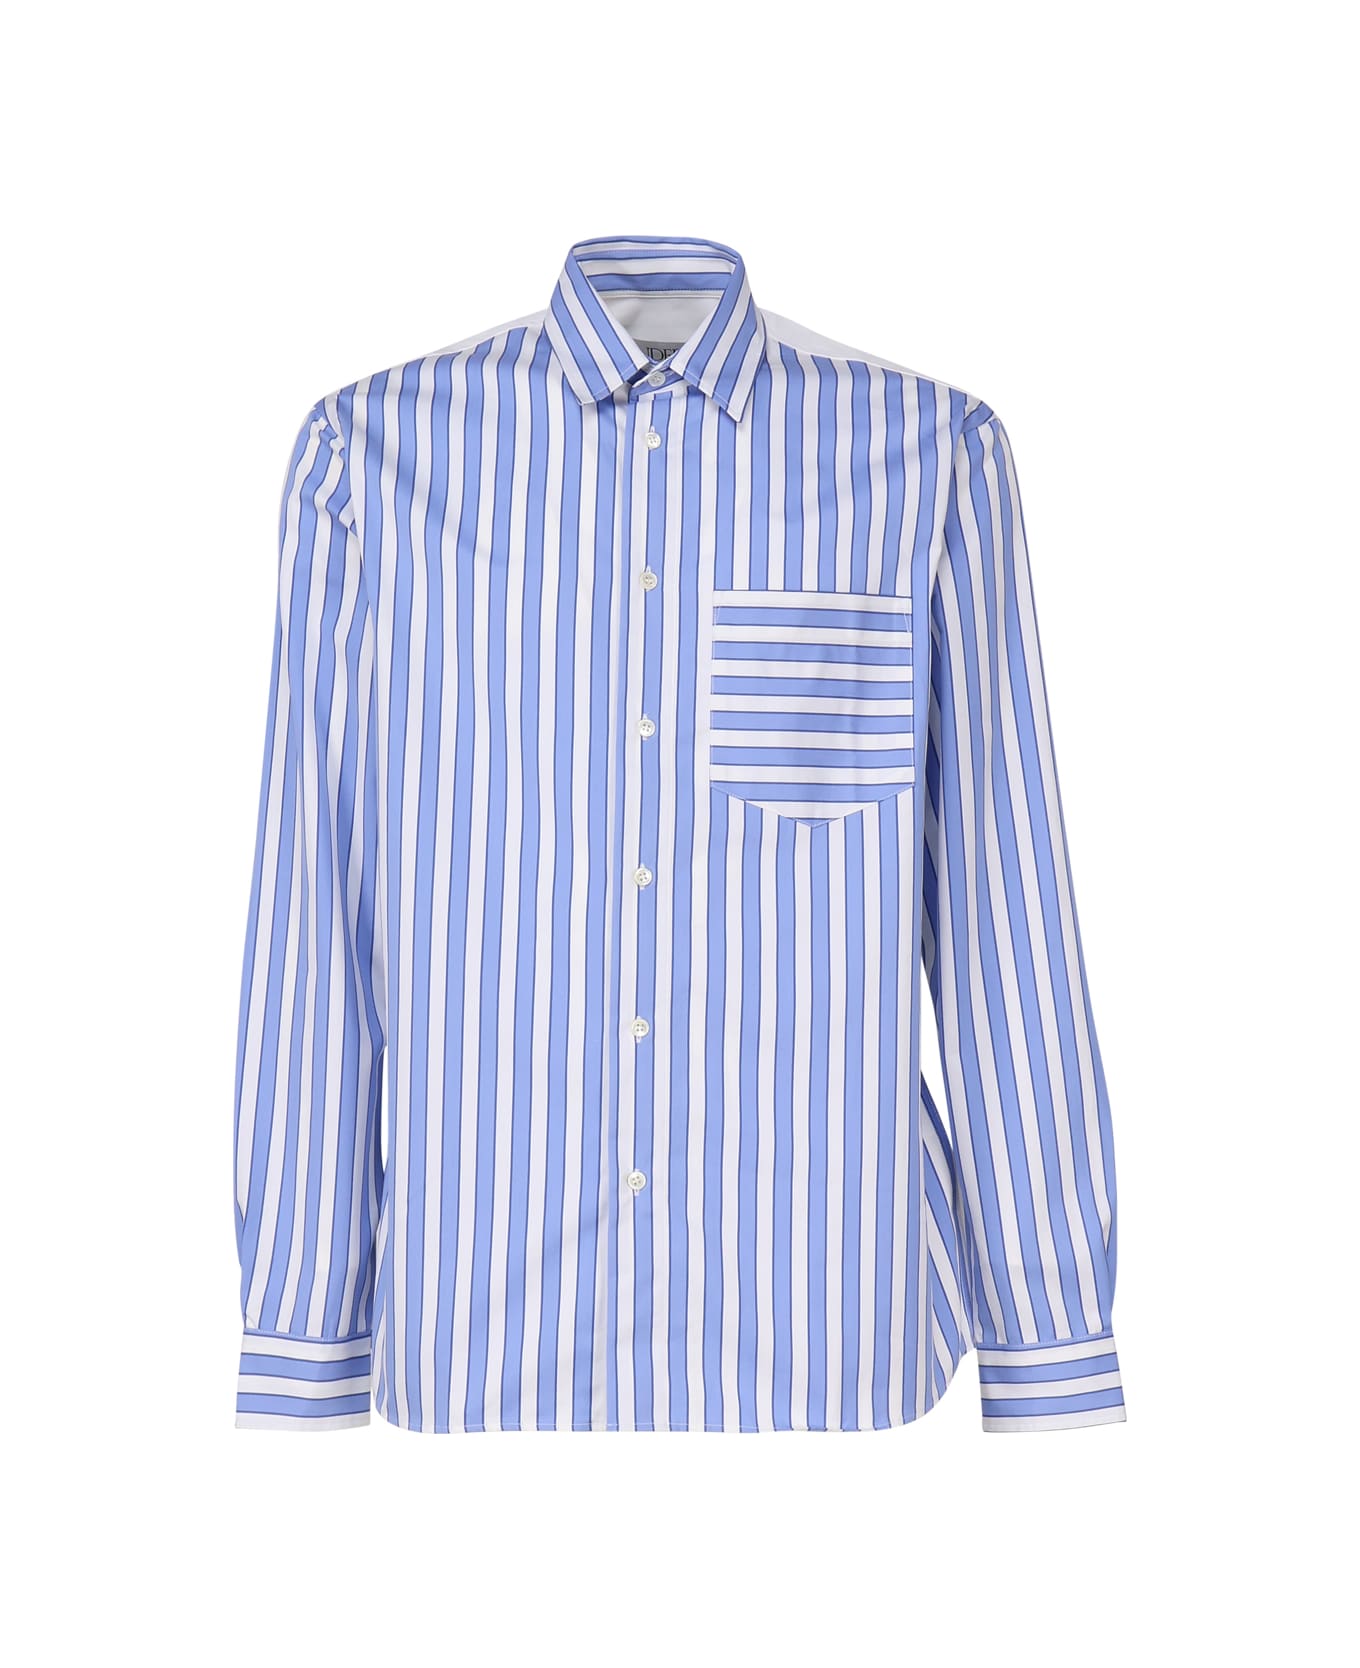 J.W. Anderson Striped Shirt With Insert Design - Light blue/white